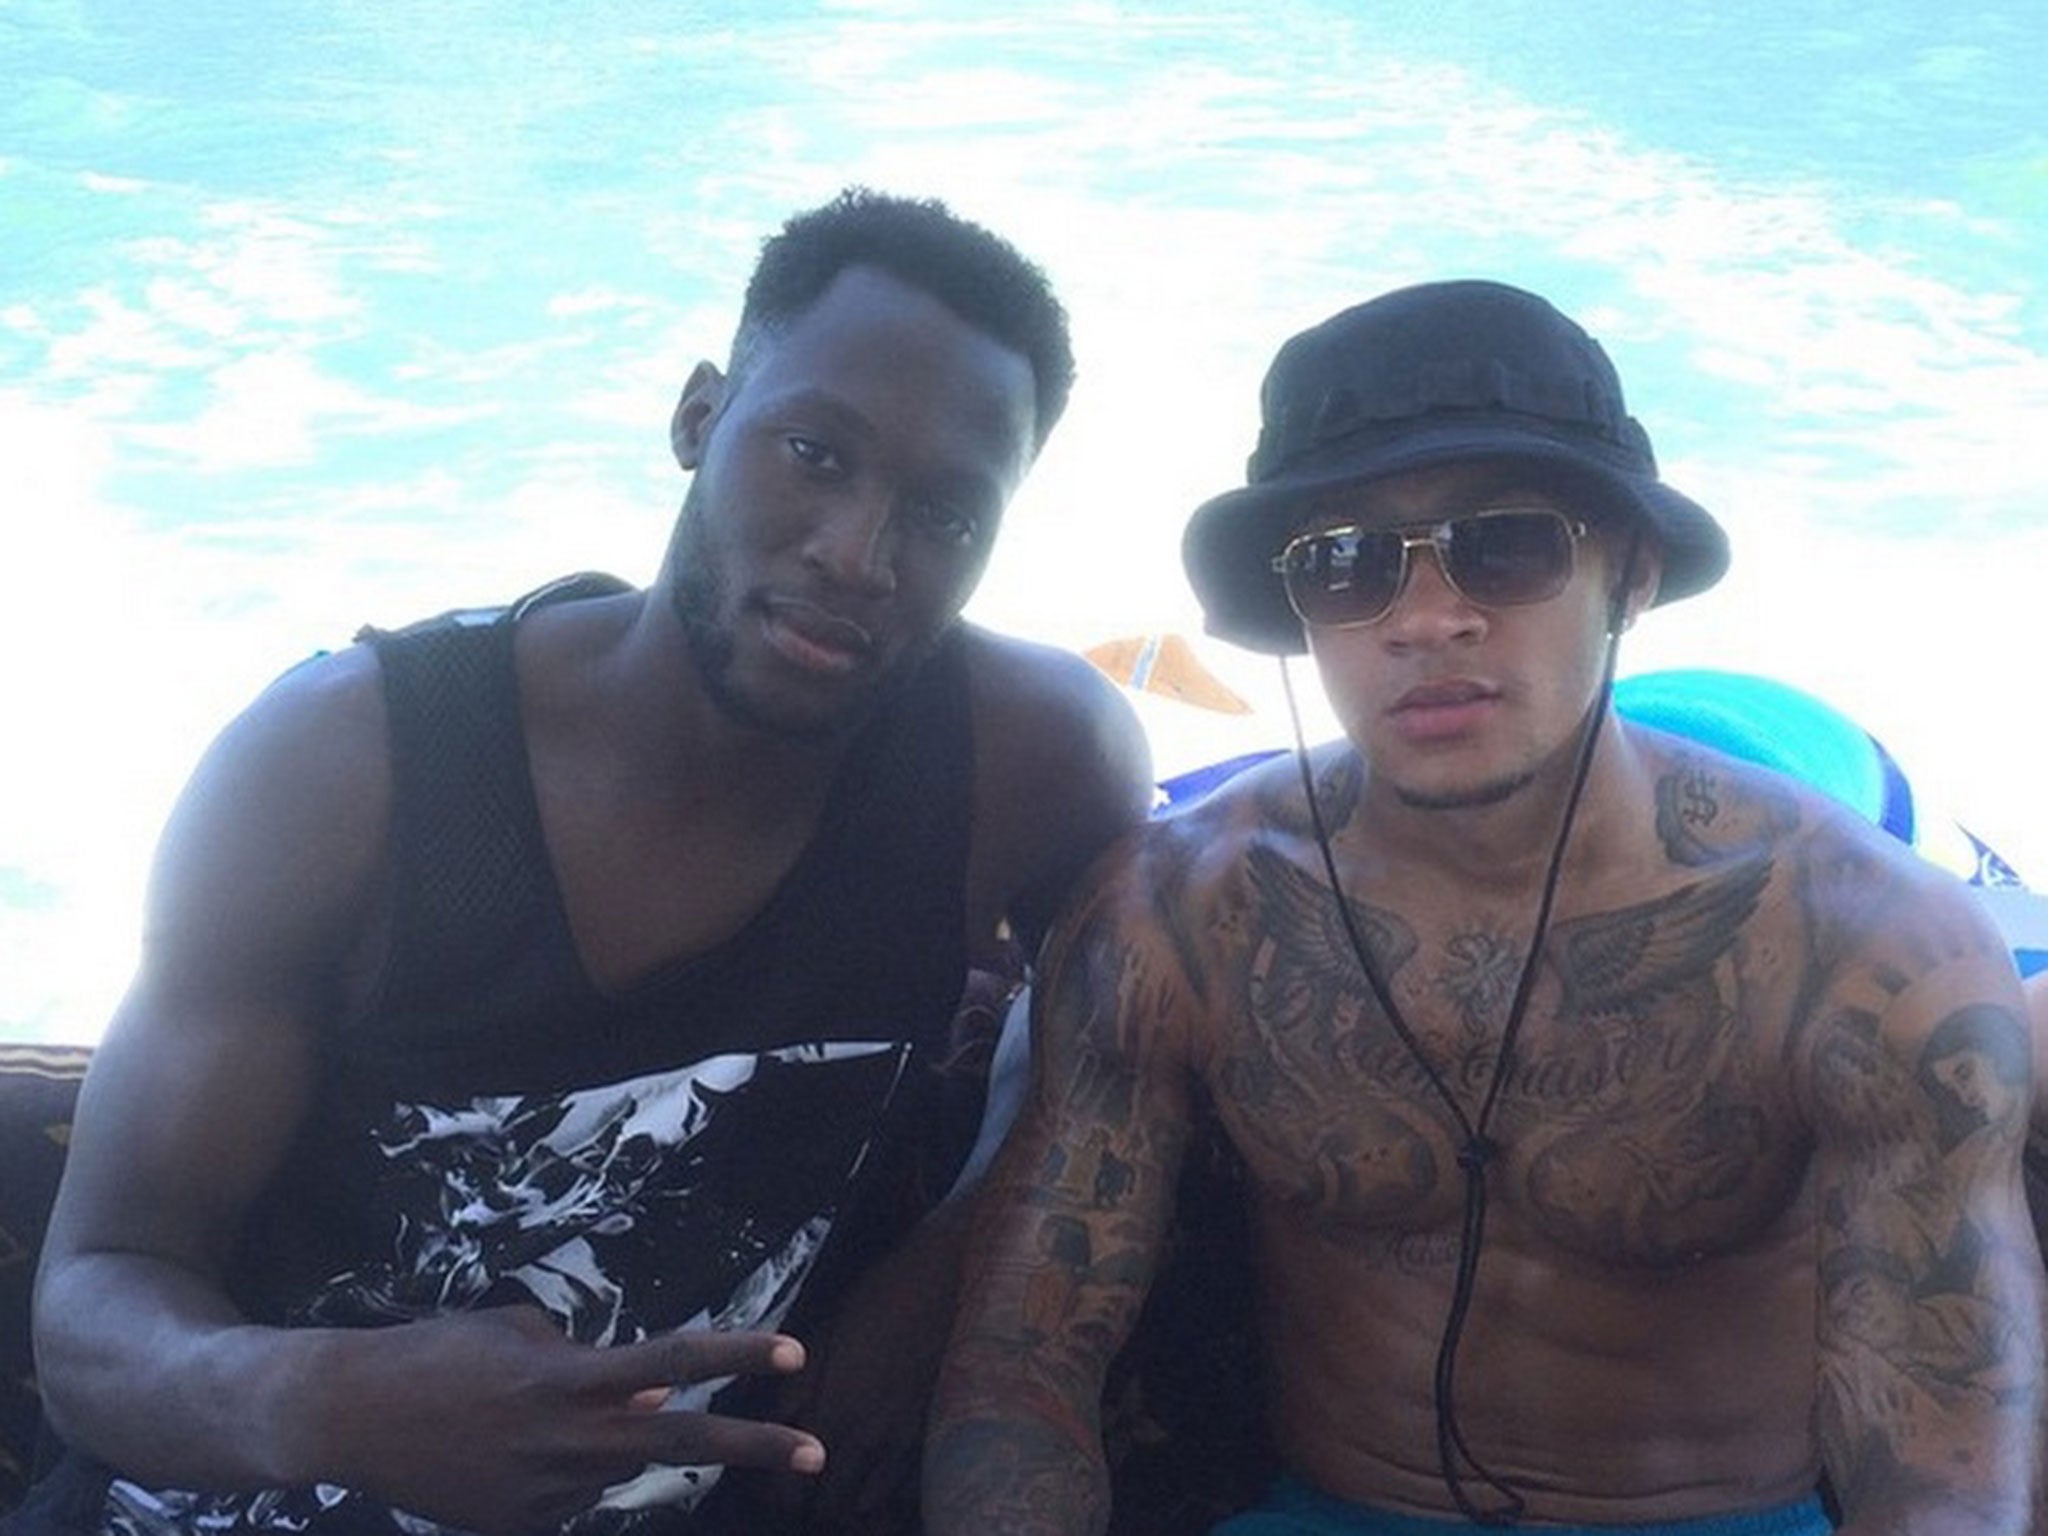 Memphis Depay becoming Manchester United's super agent after